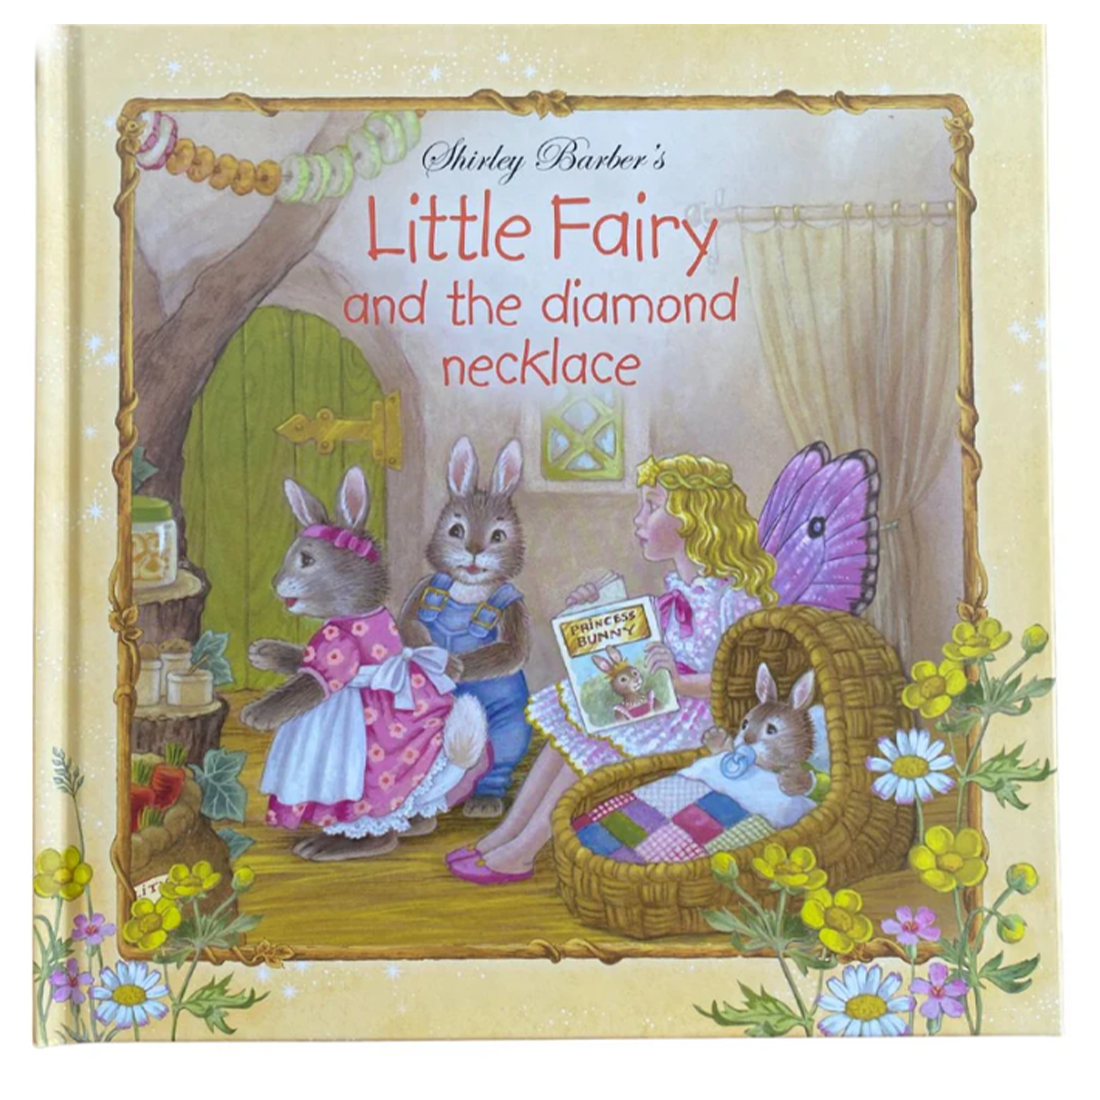 Little Fairy and the Diamond Necklace Hardback Book by Shirley Barber